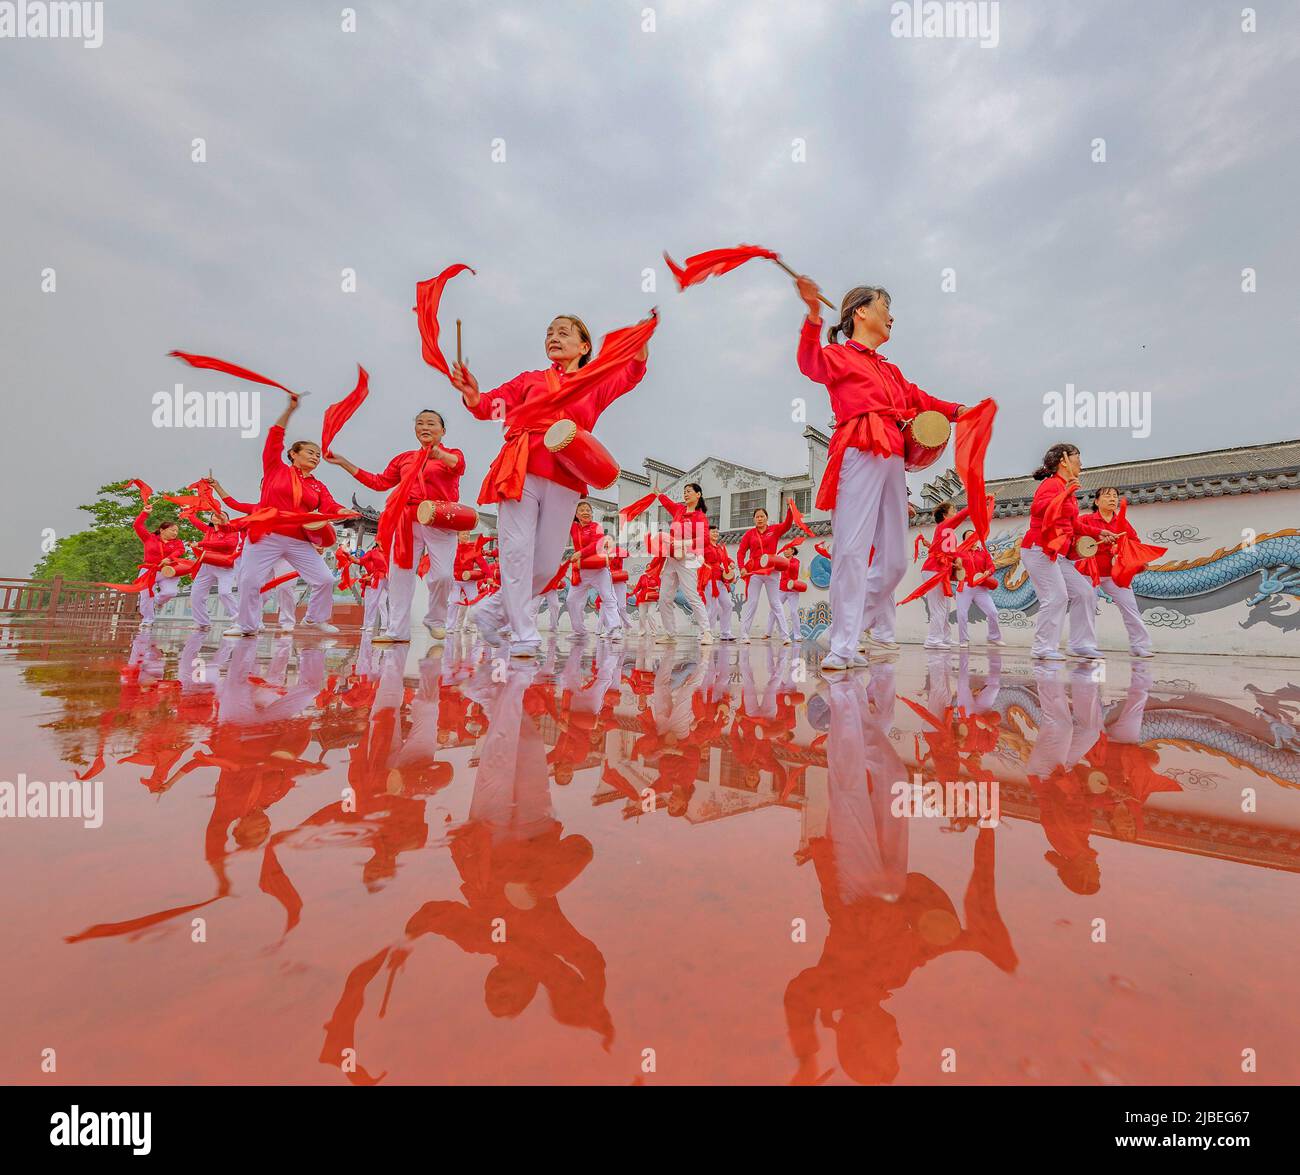 SUQIAN, CHINA - JUNE 5, 2022 - More than 30 bodybuilders sing and dance at the Lakeside Shuanglong Stage to celebrate World Environment Day in Suqian, Stock Photo